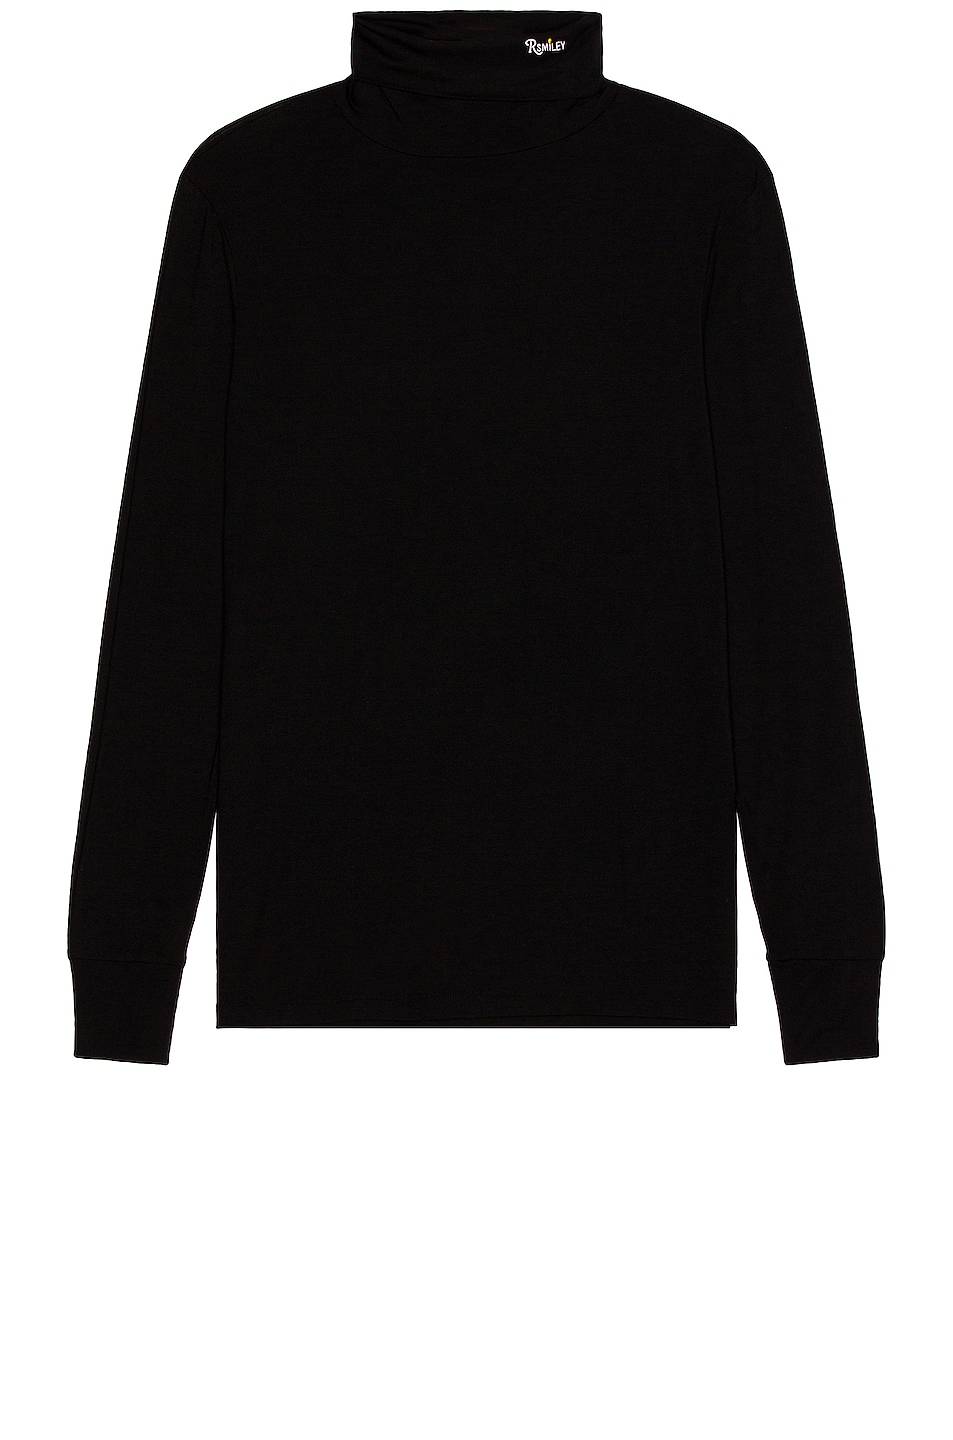 Image 1 of Raf Simons x Smiley Embroidery Turtleneck in Black